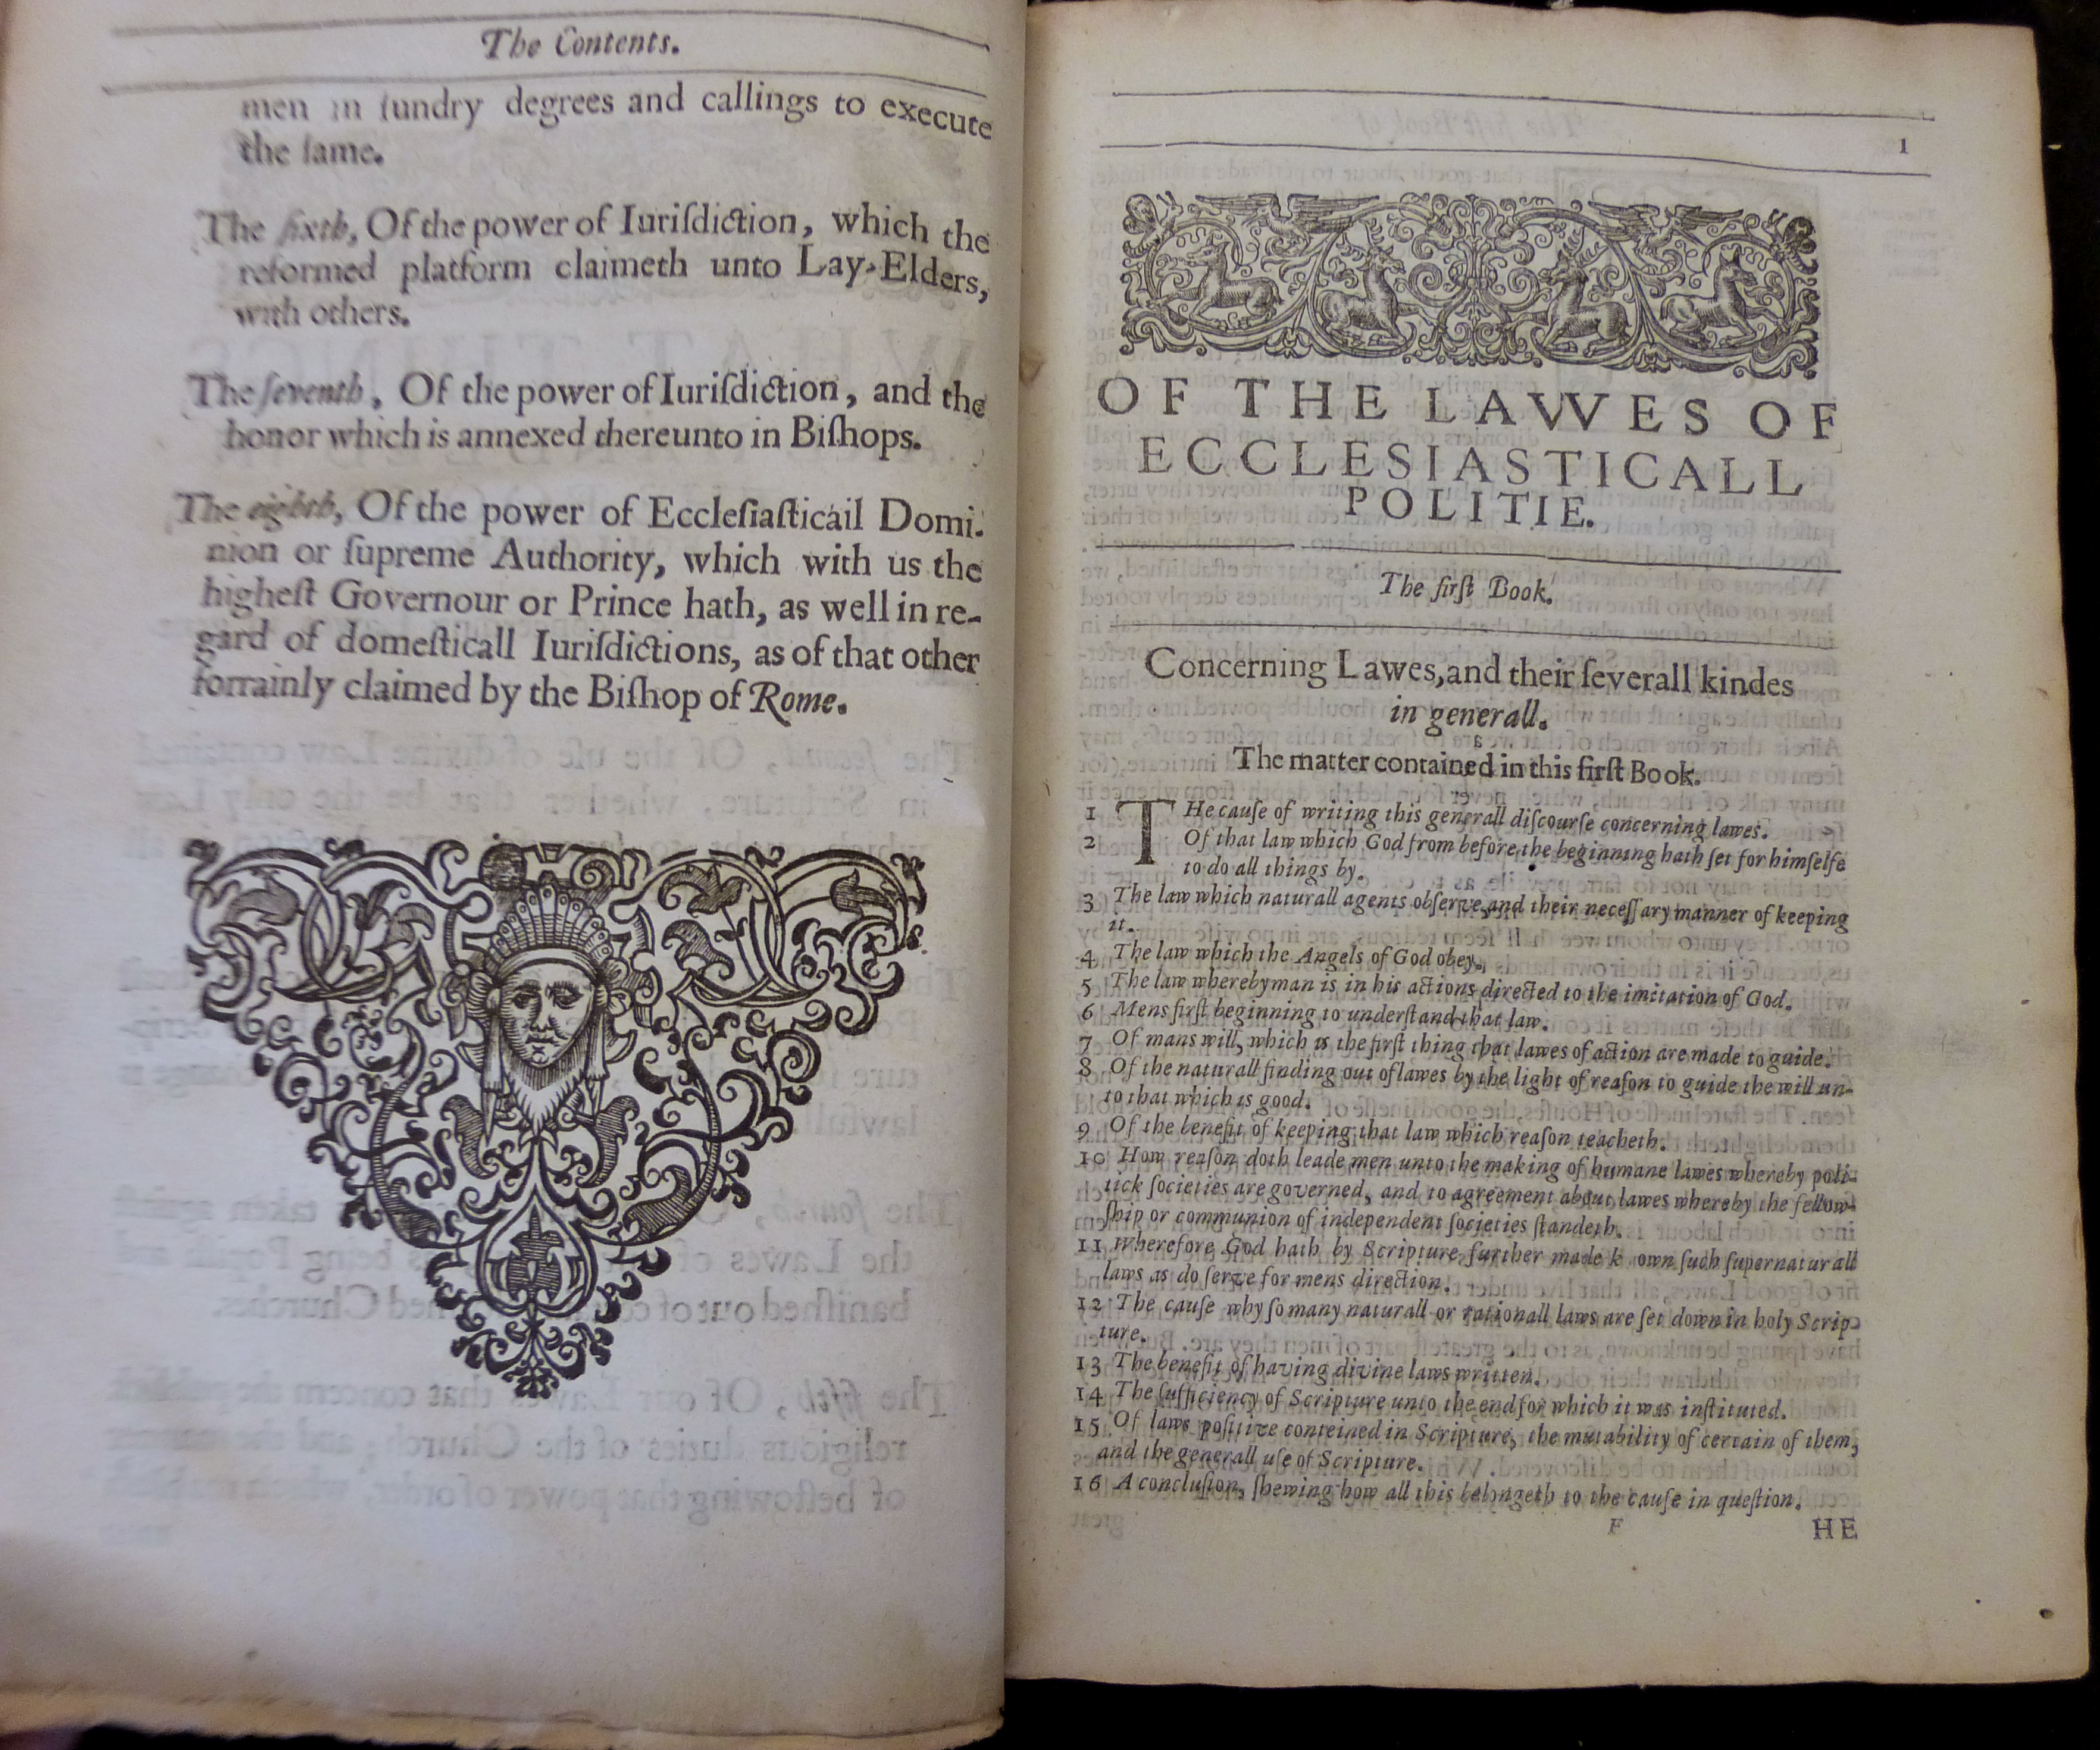 RICHARD HOOKER: THE LAWES OF ECCLESIASTICAL POLITE EIGHT BOOKES, London, printed by Richard Bishop - Image 2 of 3